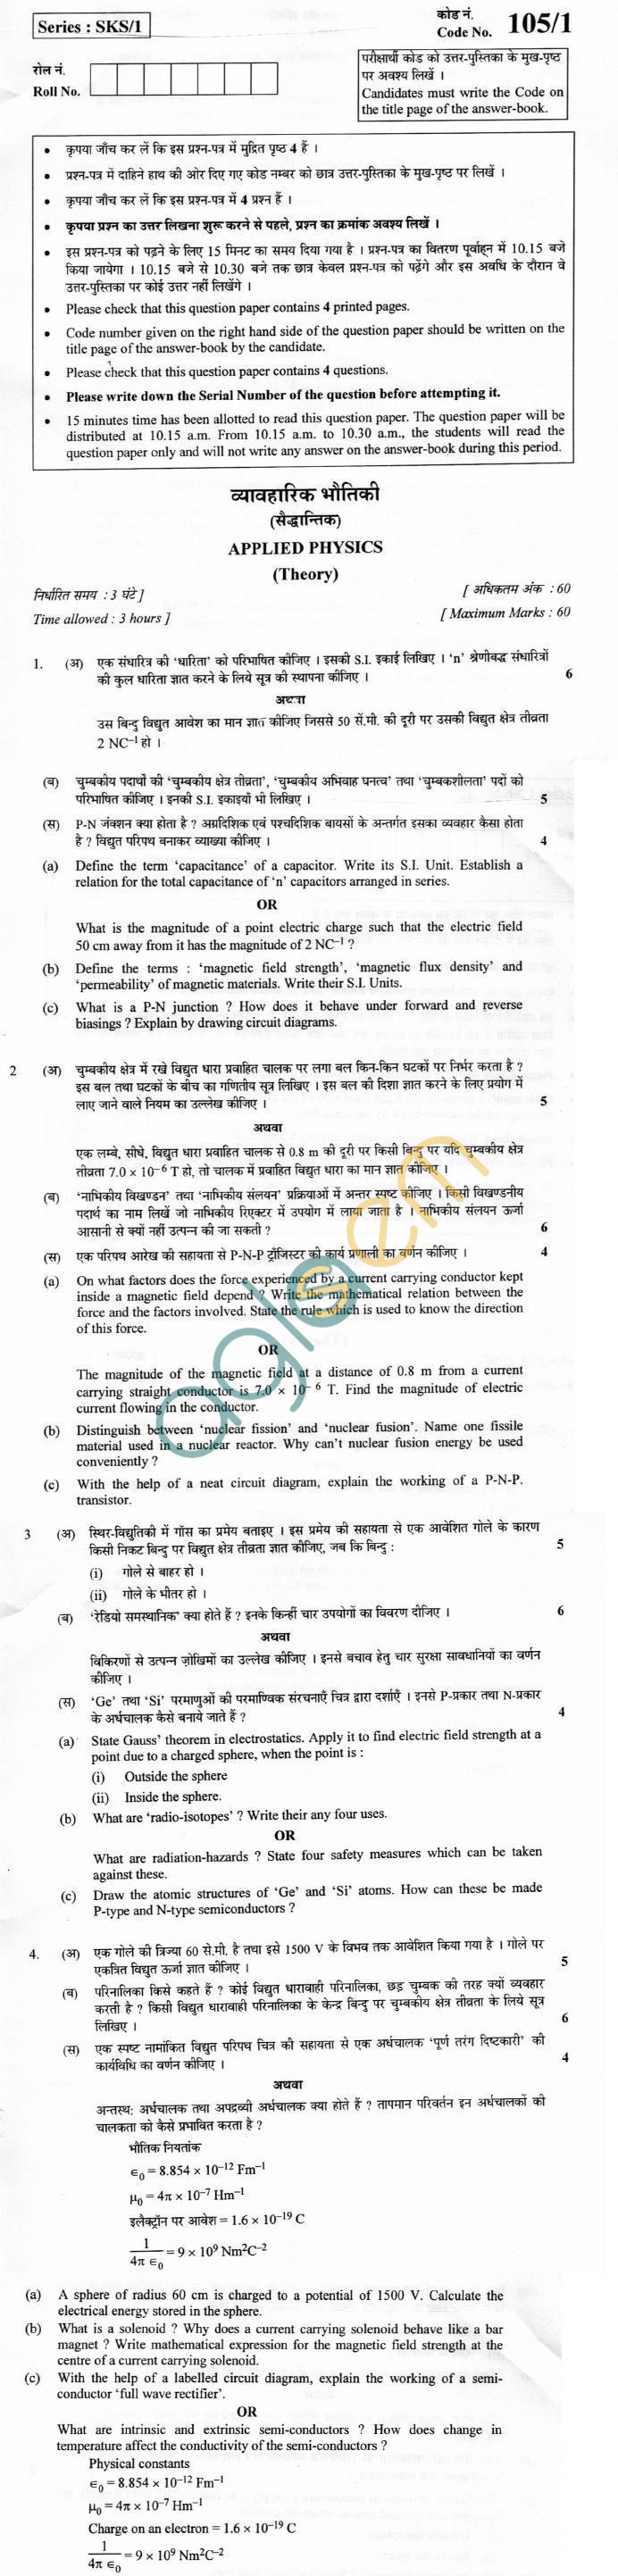 CBSE Board Exam 2013 Class XII Question Paper - Applied Physics